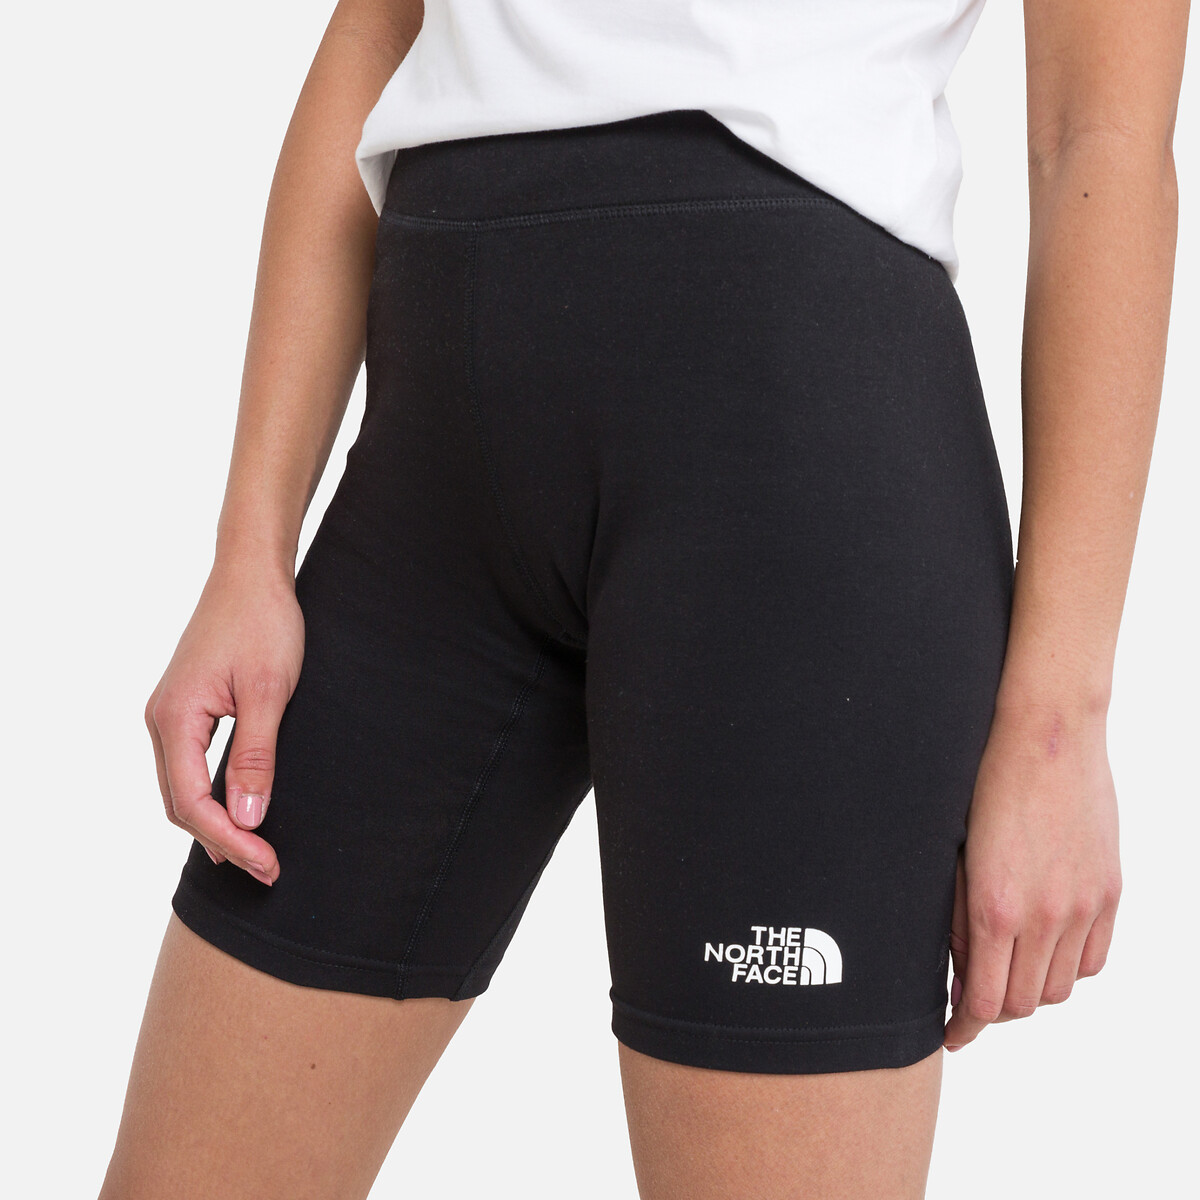 Comfortable Sports Cycling Shorts with Logo Print and High Waist in Cotton